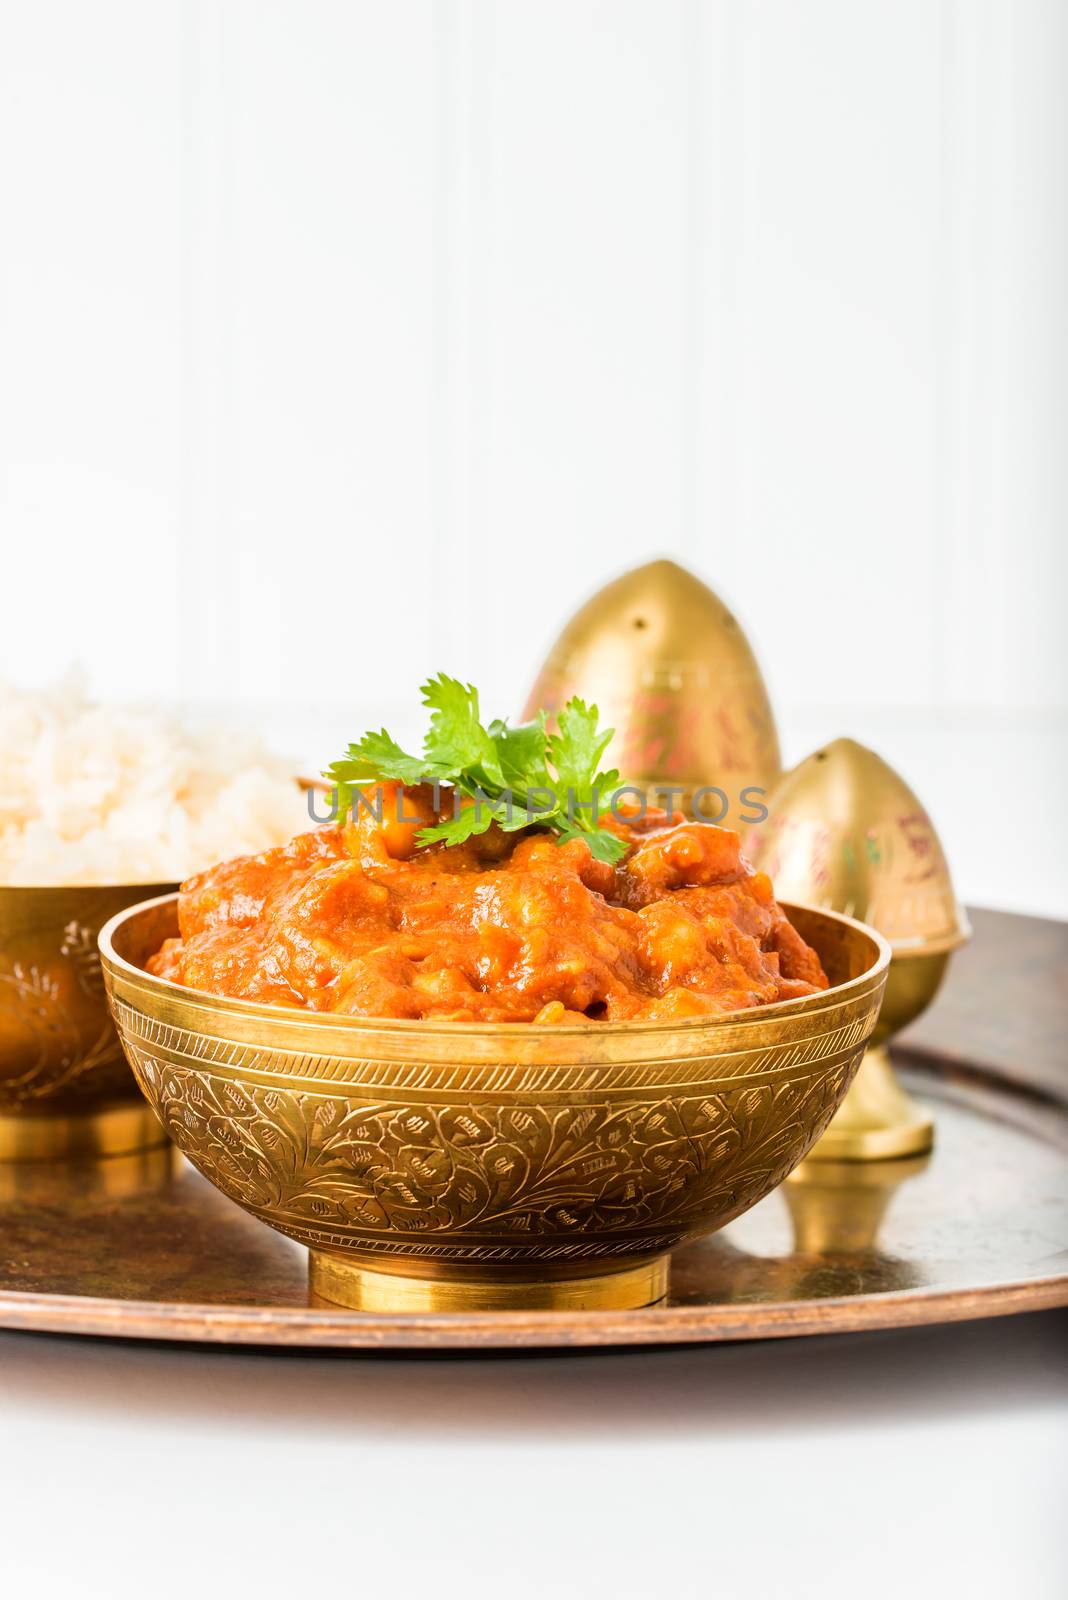 An East Indian dish consisting of chick peas in a spicy tomato sauce.